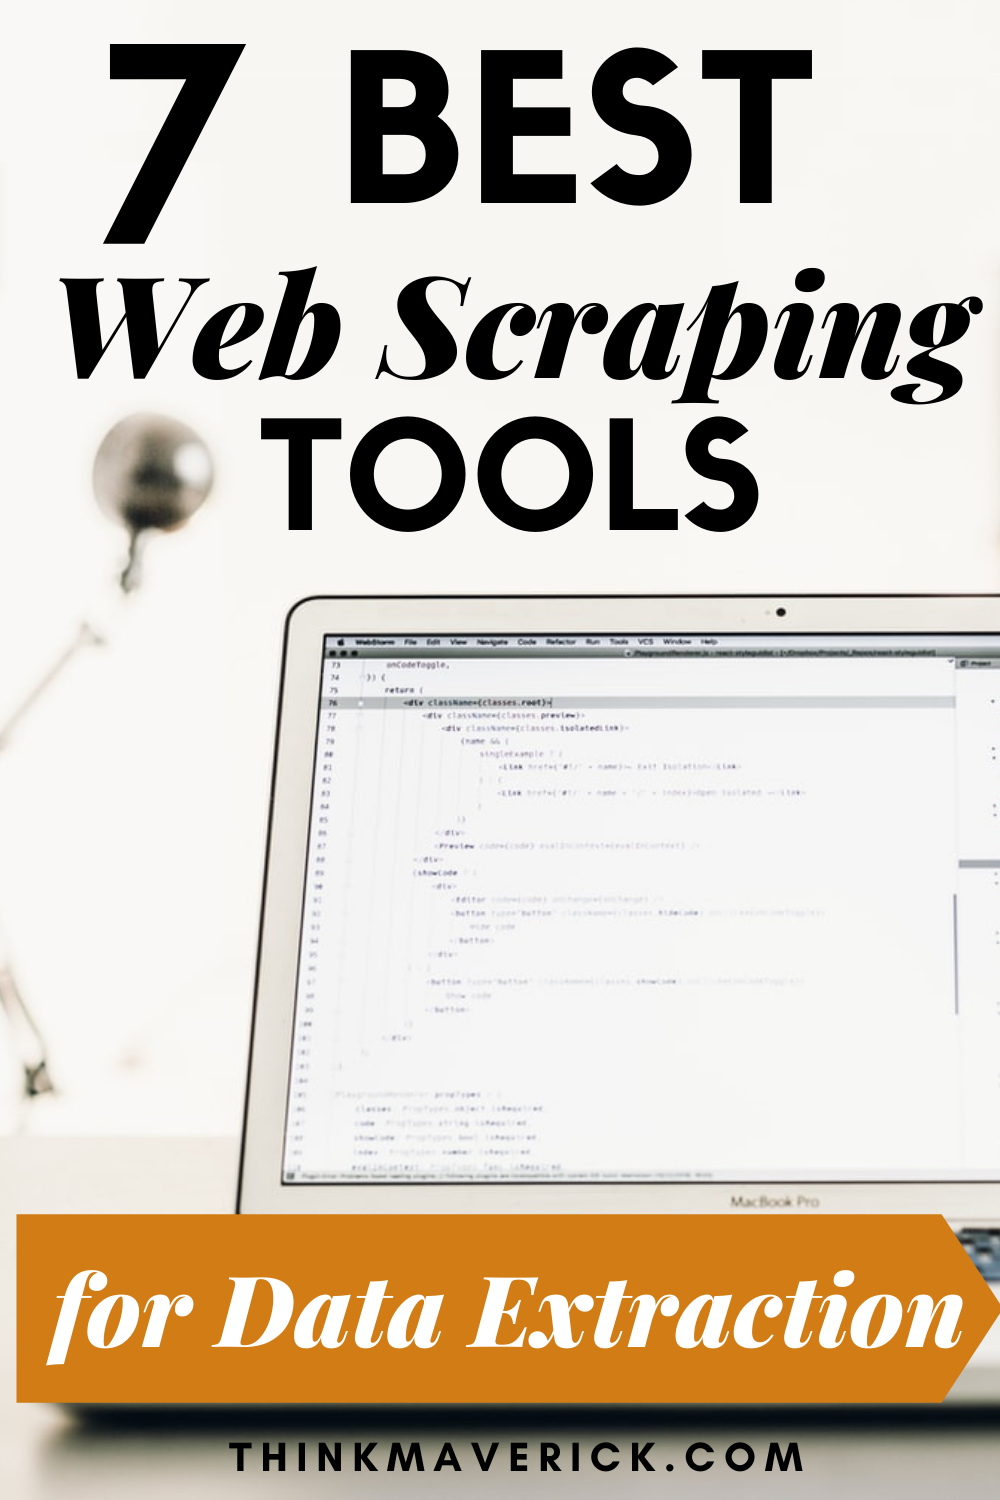 7 Best Web Scraping Tools for Data Extraction in 2021. thinkmaverick